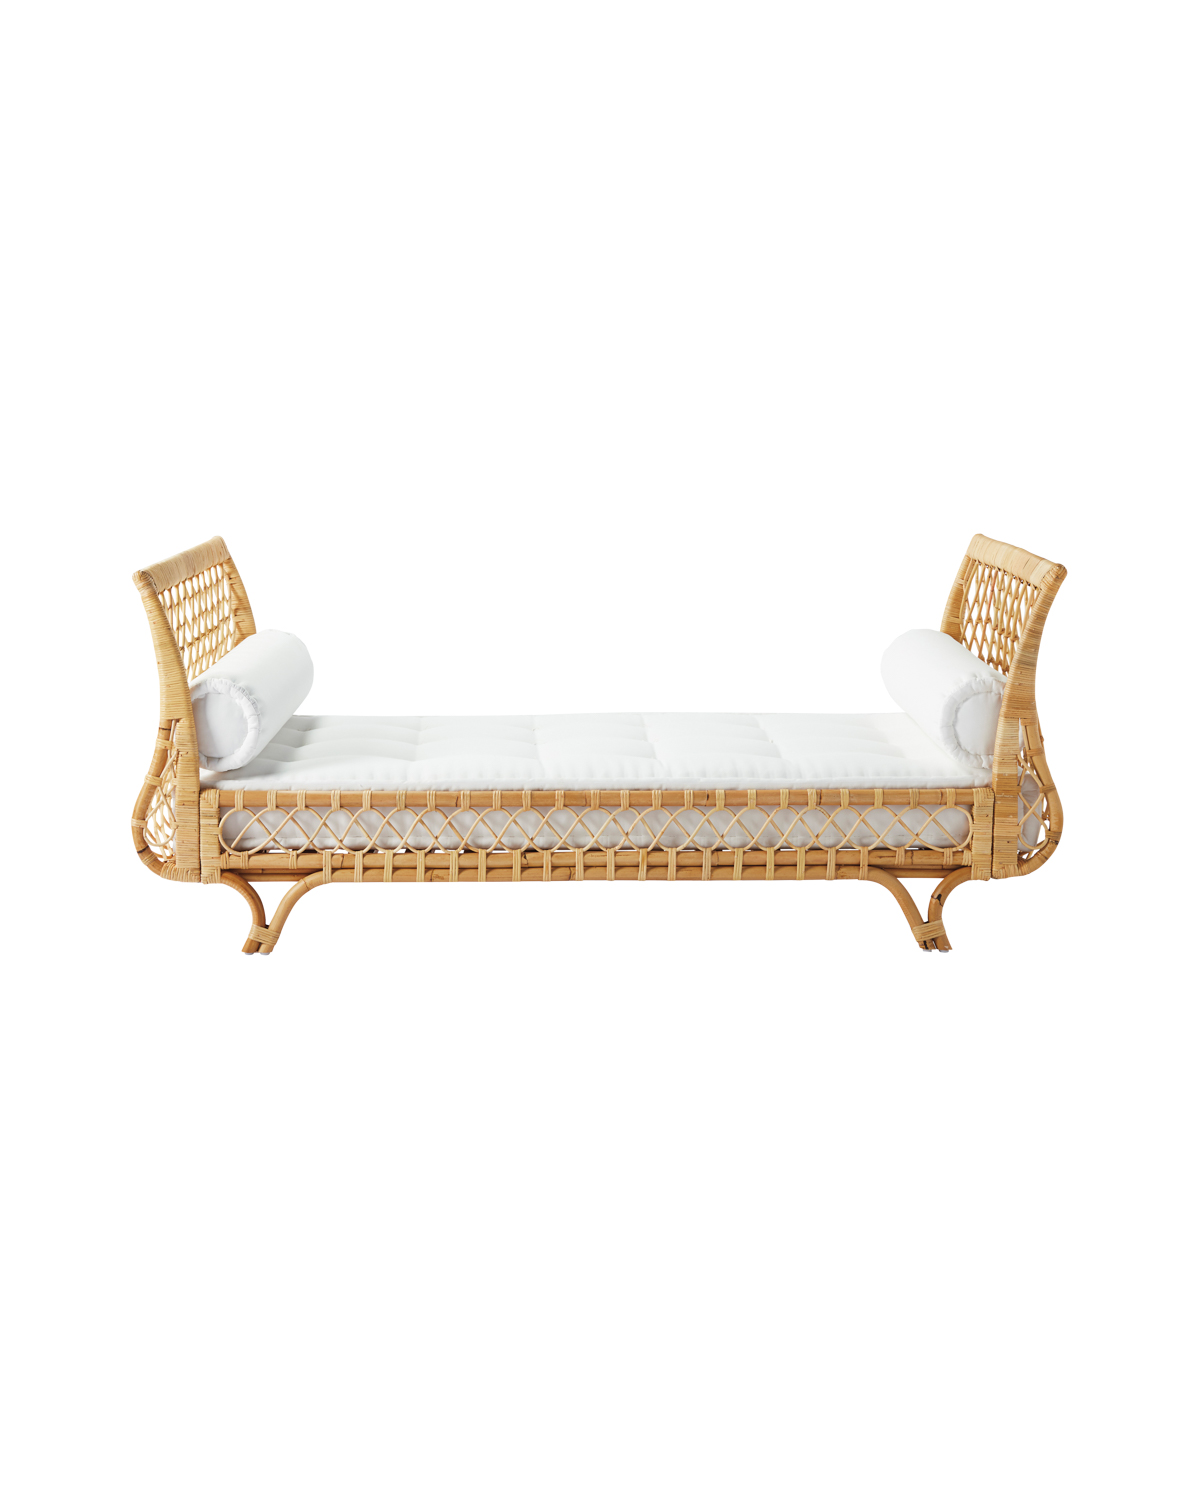 brown rattan daybed